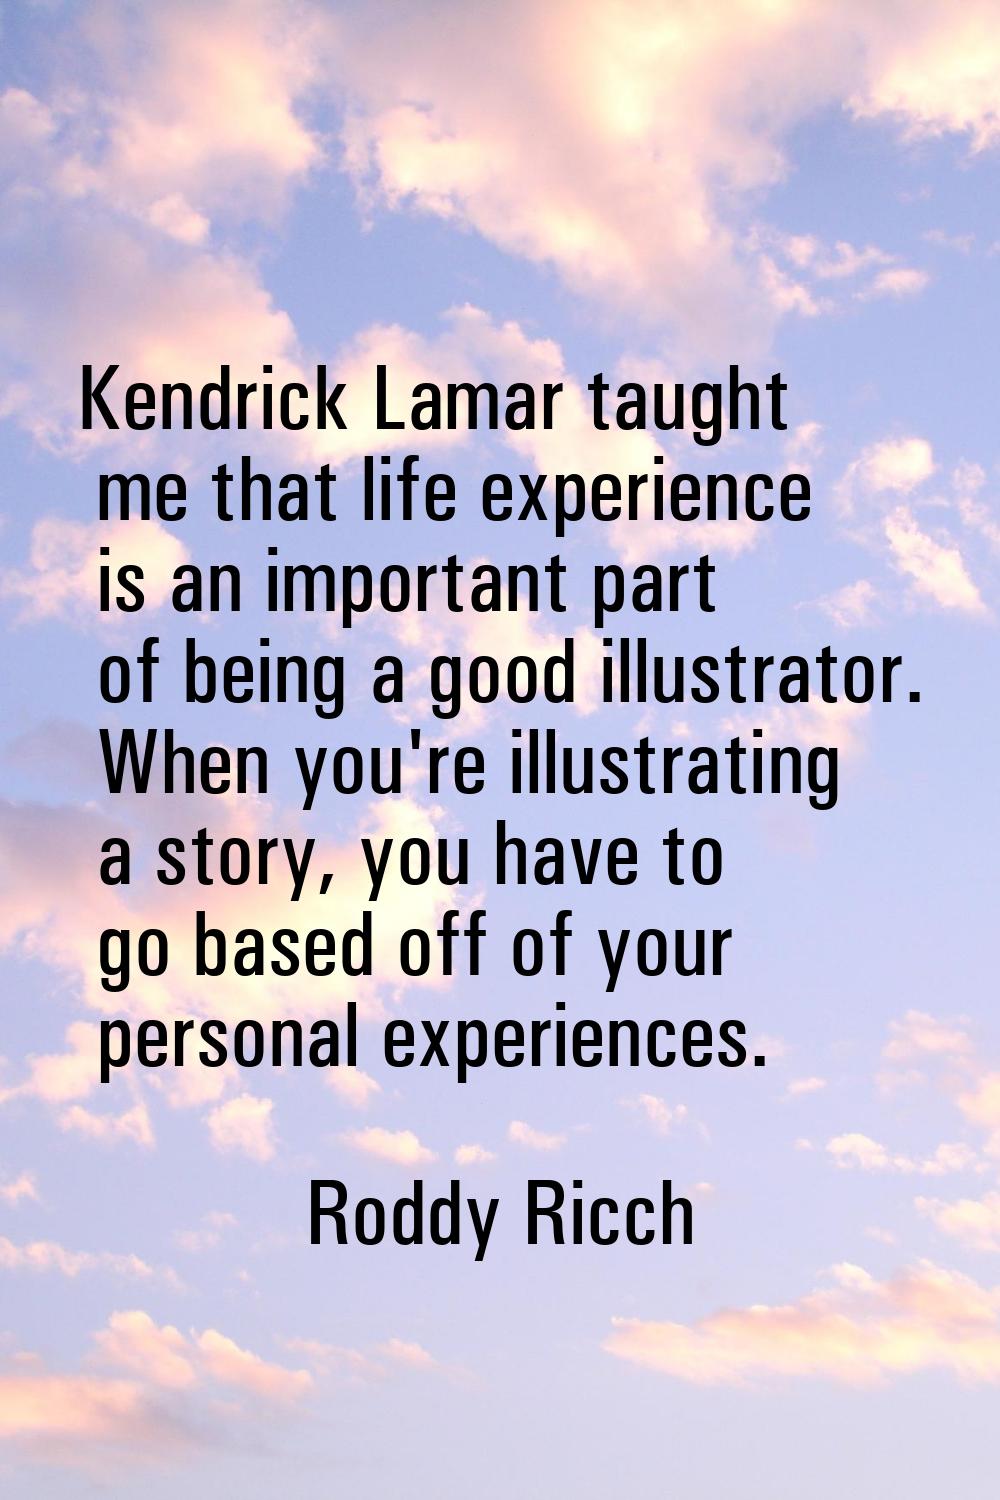 Kendrick Lamar taught me that life experience is an important part of being a good illustrator. Whe